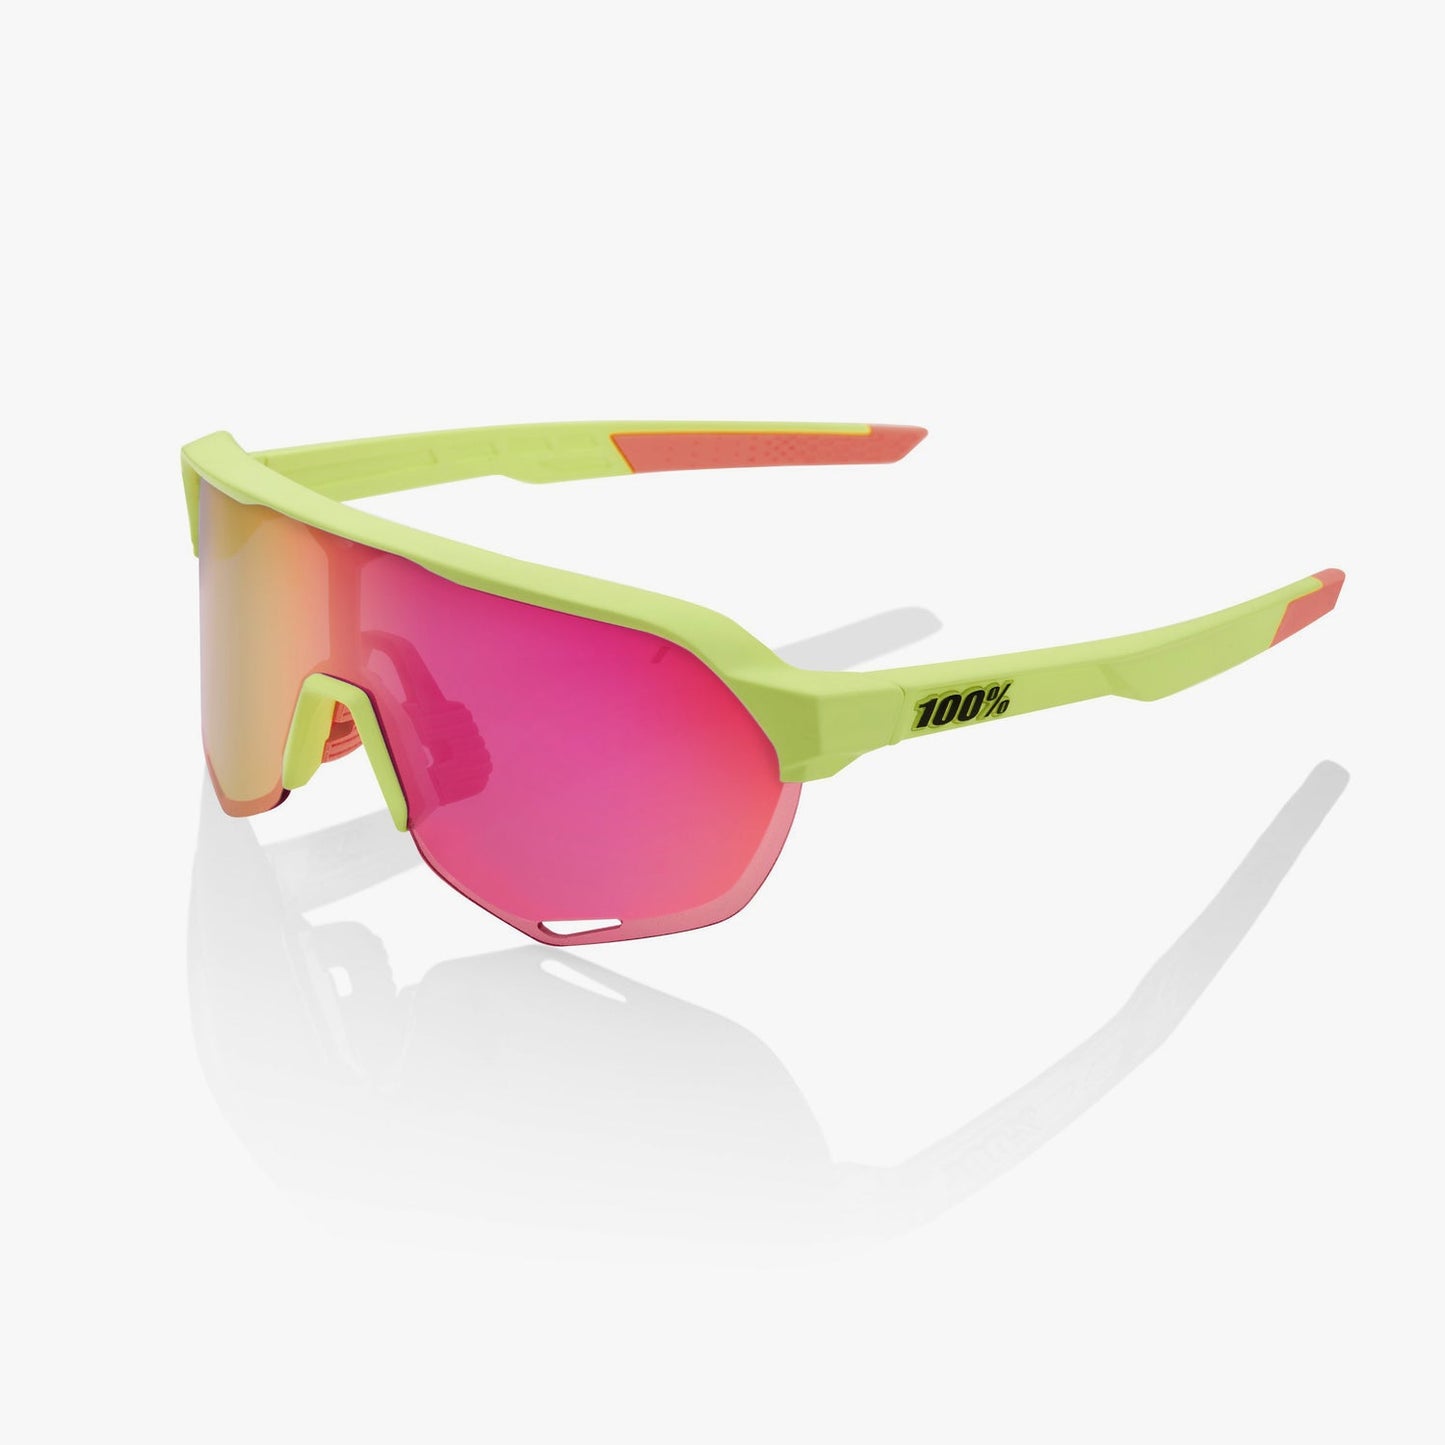 S3 - Matte Washed Out Neon Pink - Purple Multilayer Mirror Lens